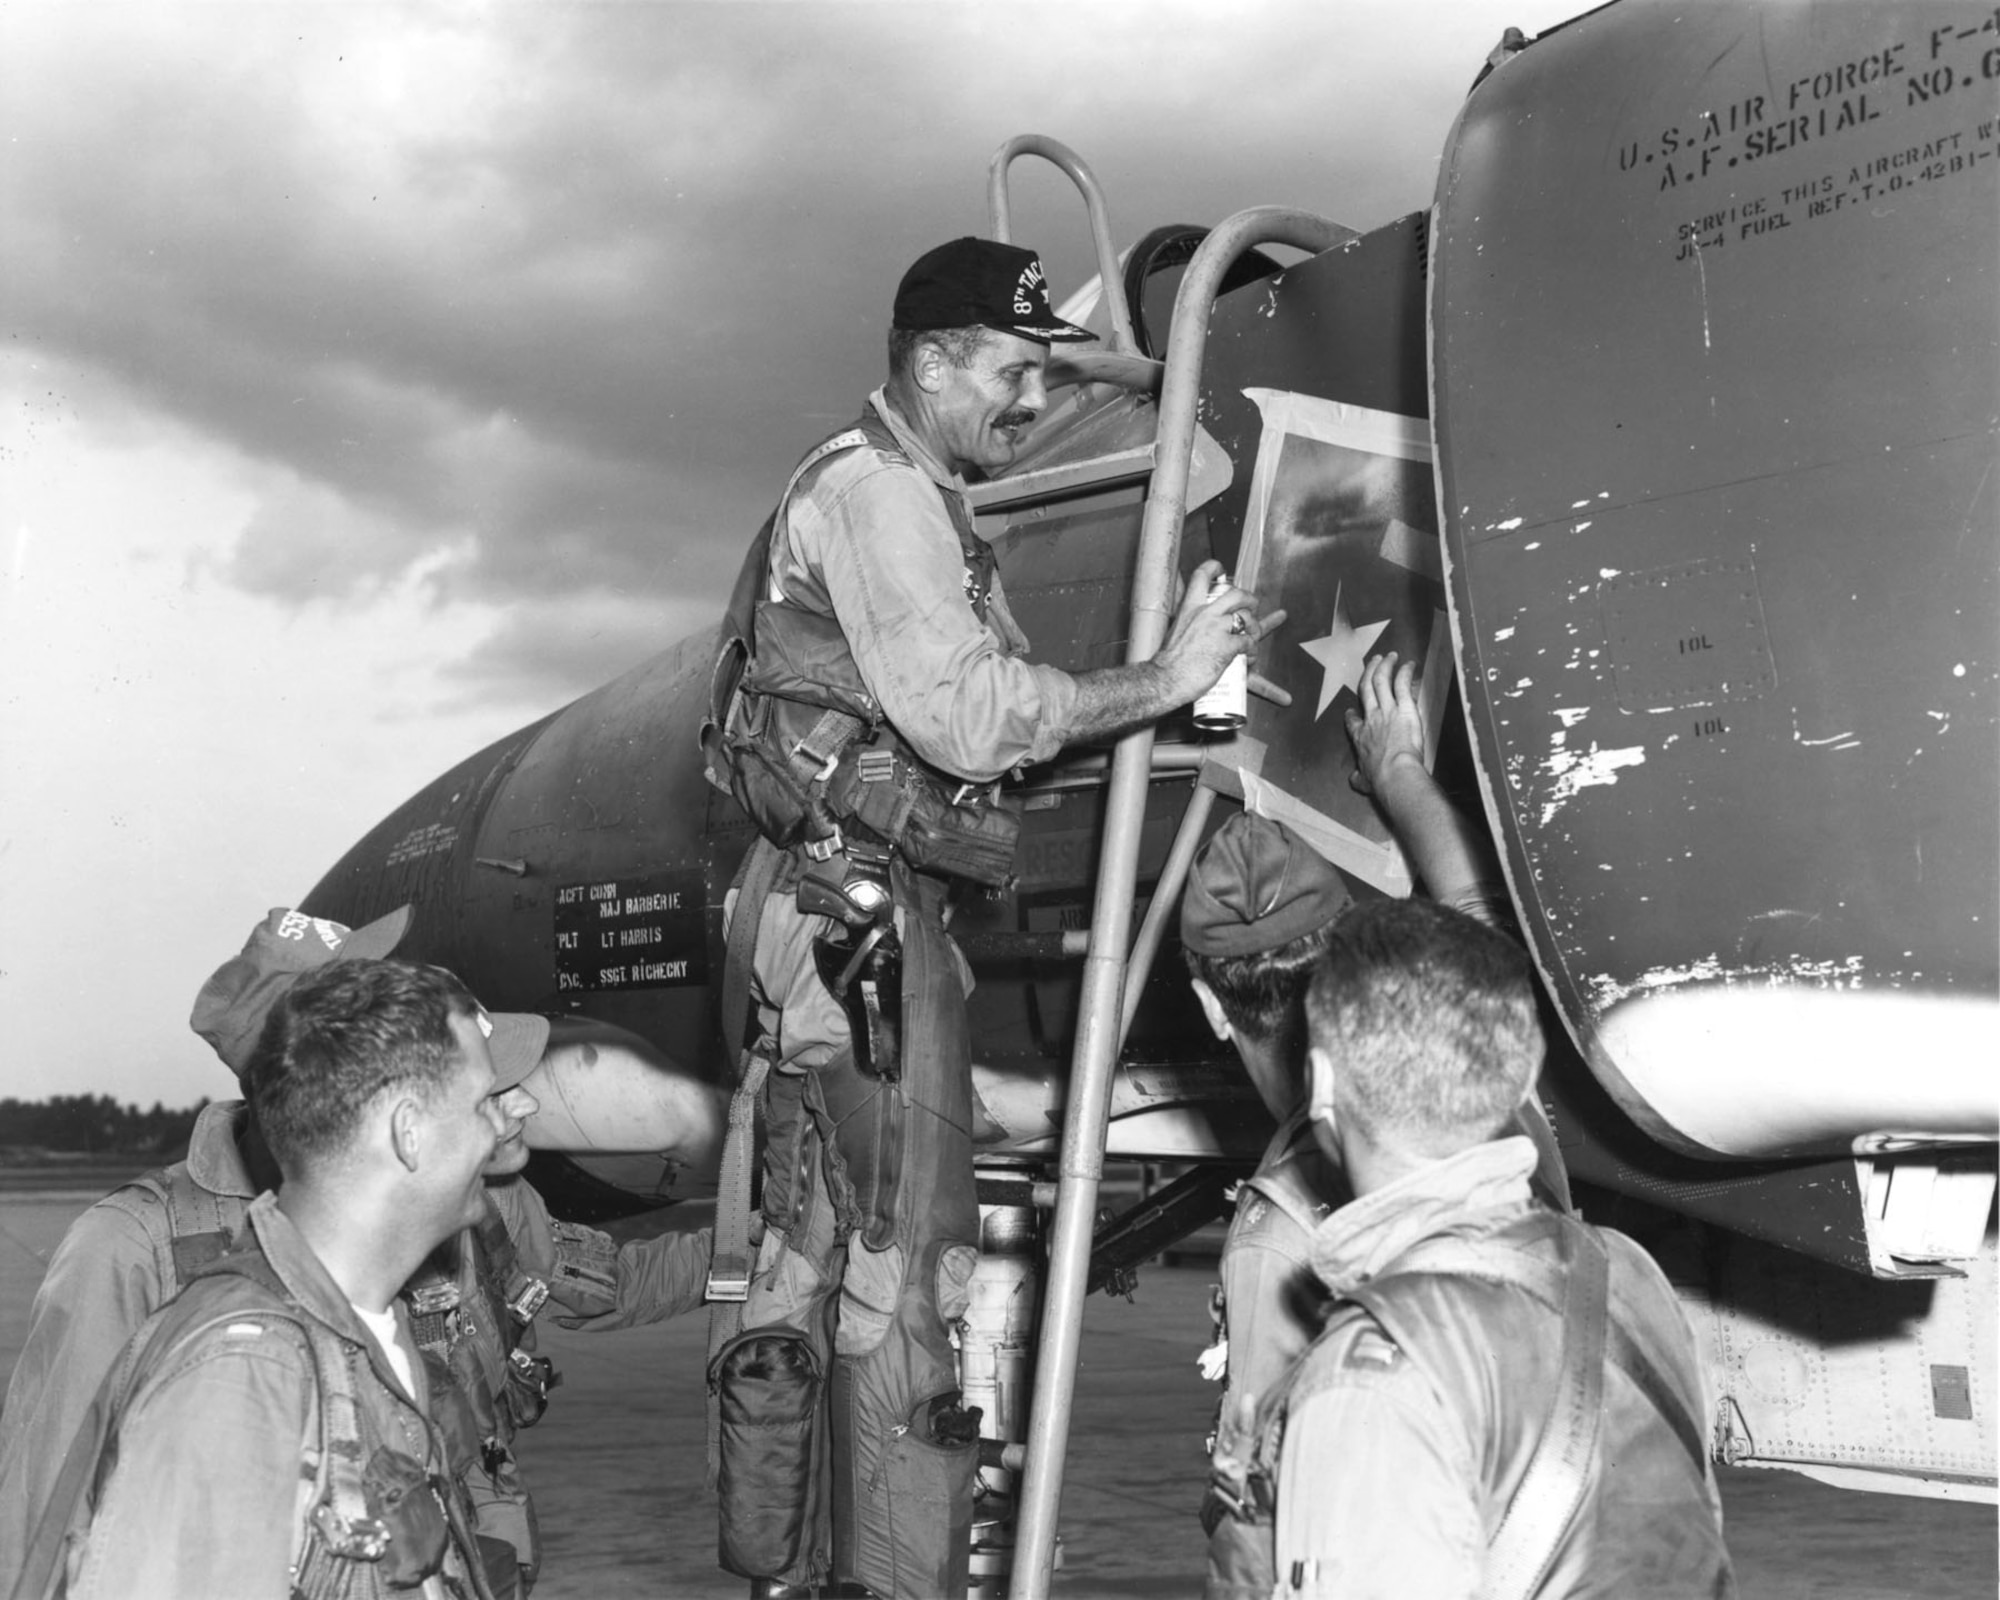 Col. Robin Olds painting a victory star on the F-4 he was flying on May 4, 1967, when he shot down a MiG-21. (U.S. Air Force photo)